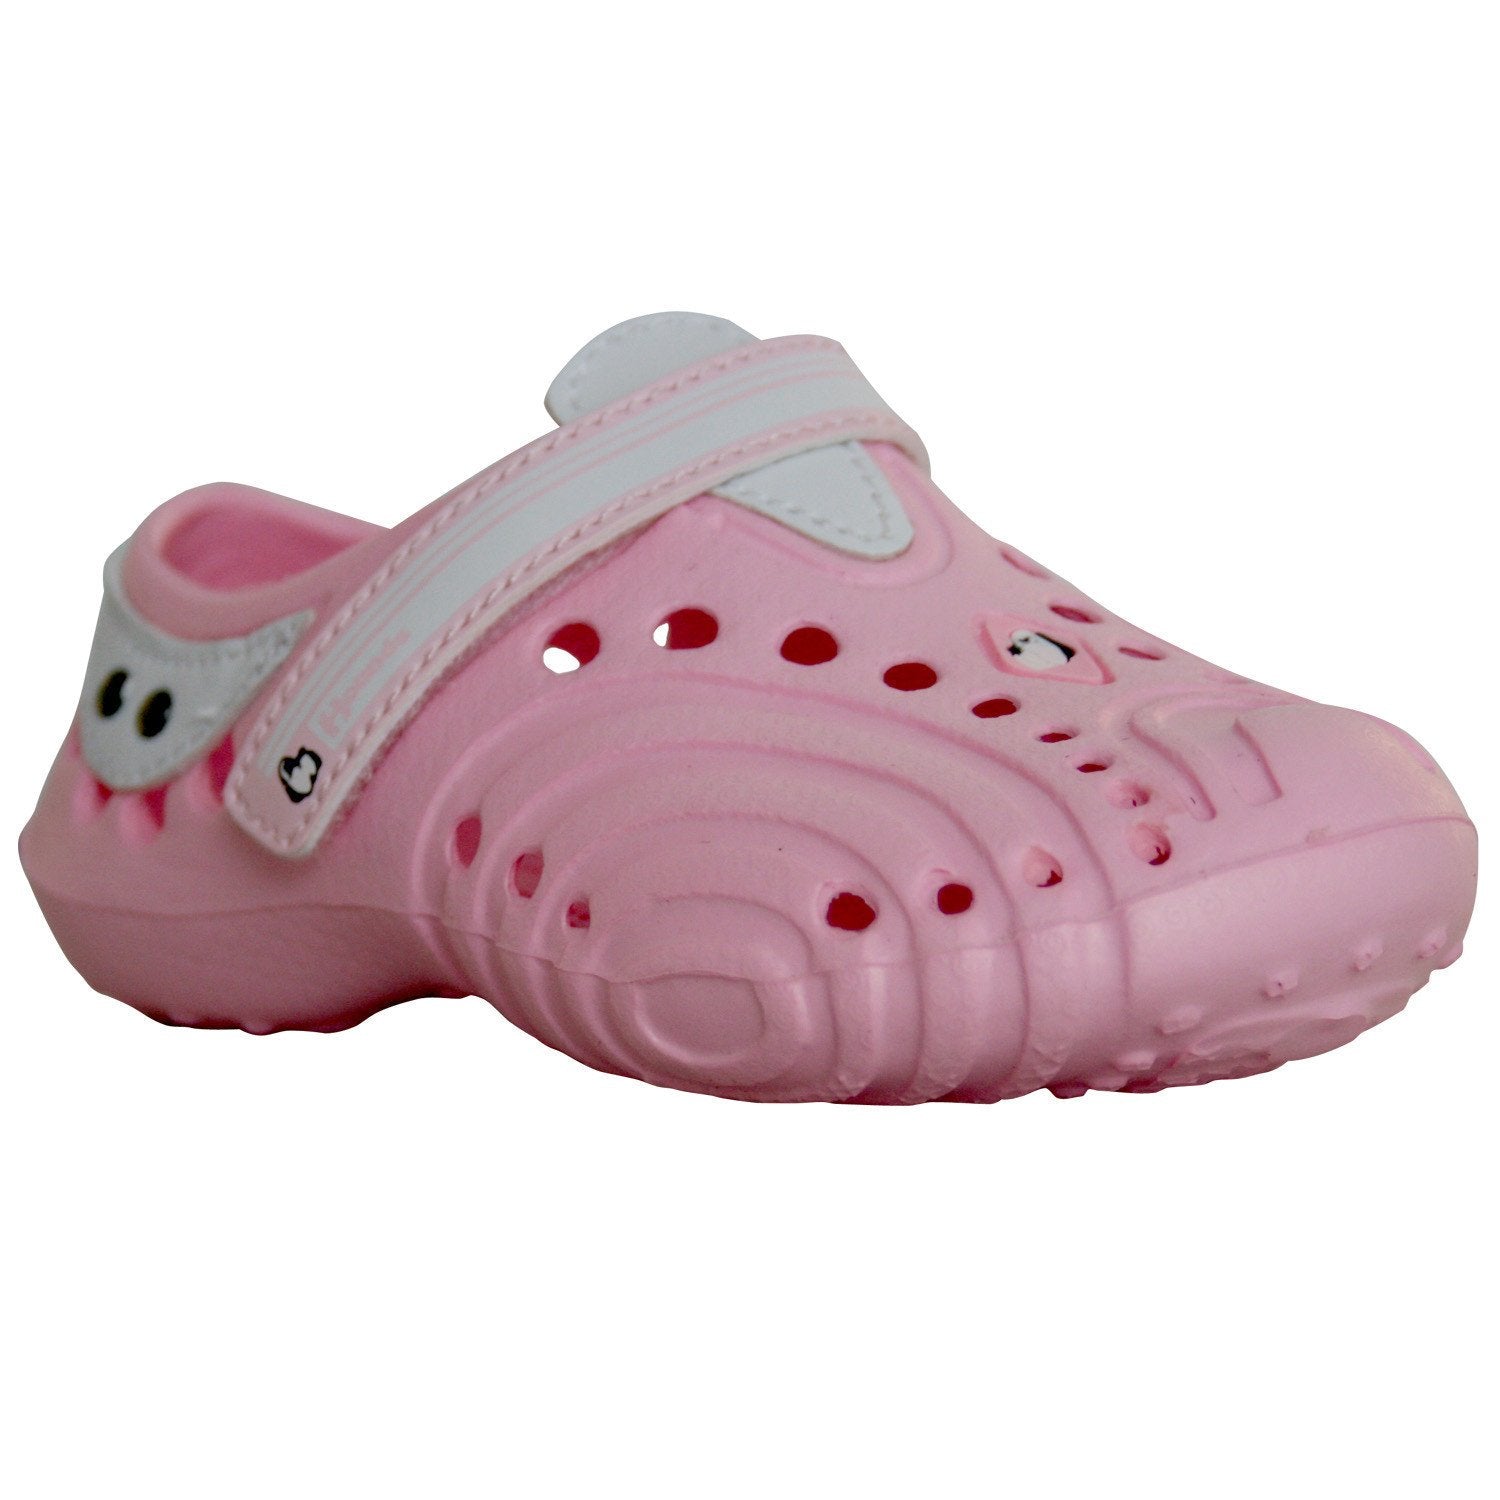 Hounds Toddlers' Ultralite Shoes